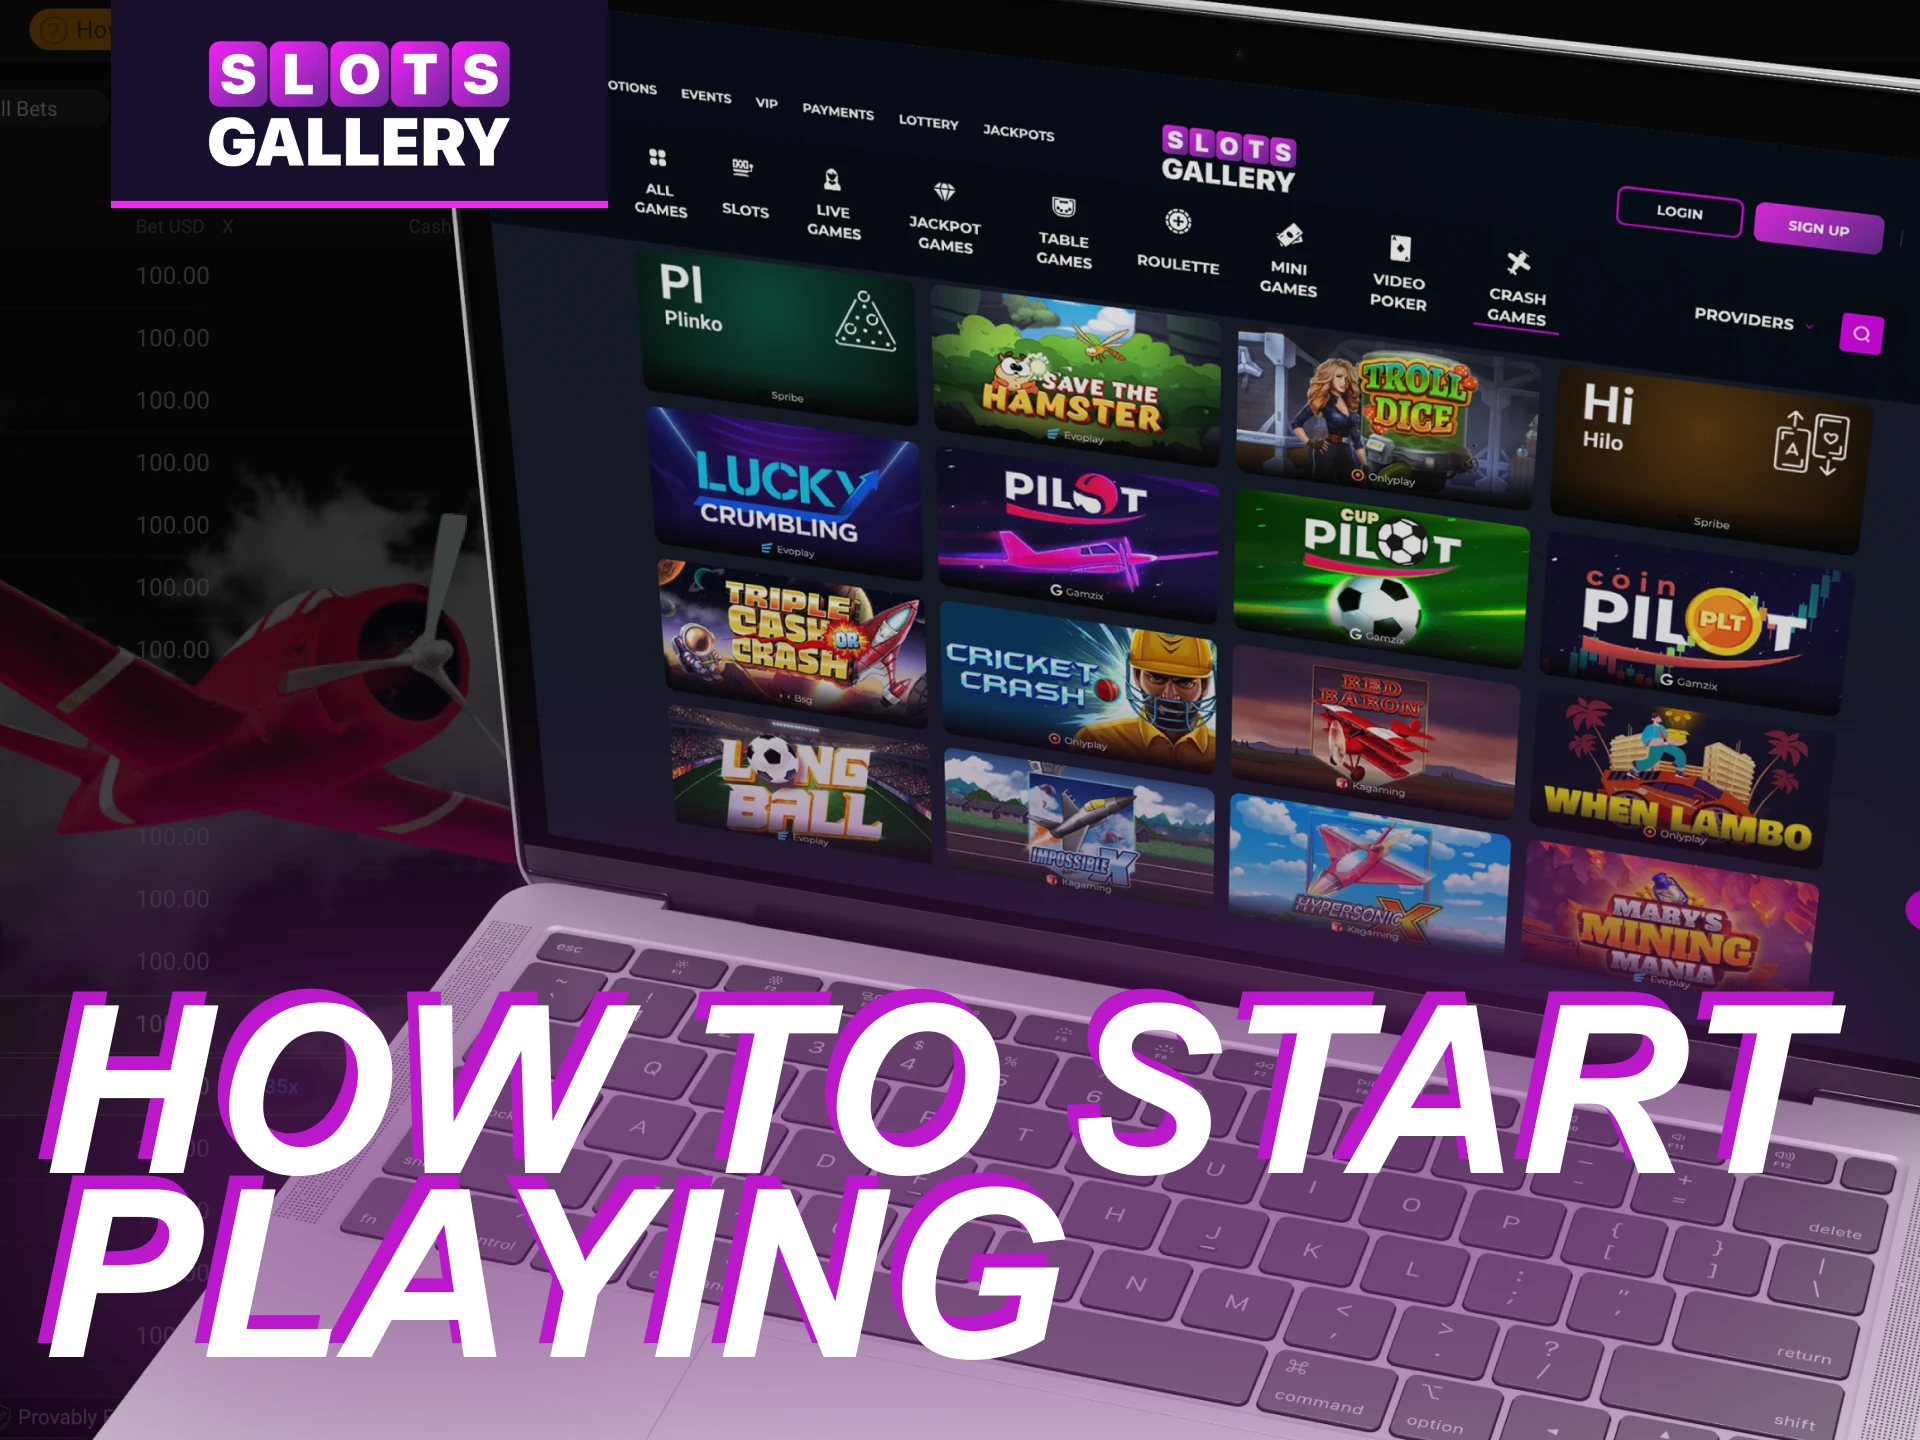 Do I need to create a new account to play crash games at the Slots Gallery online casino.